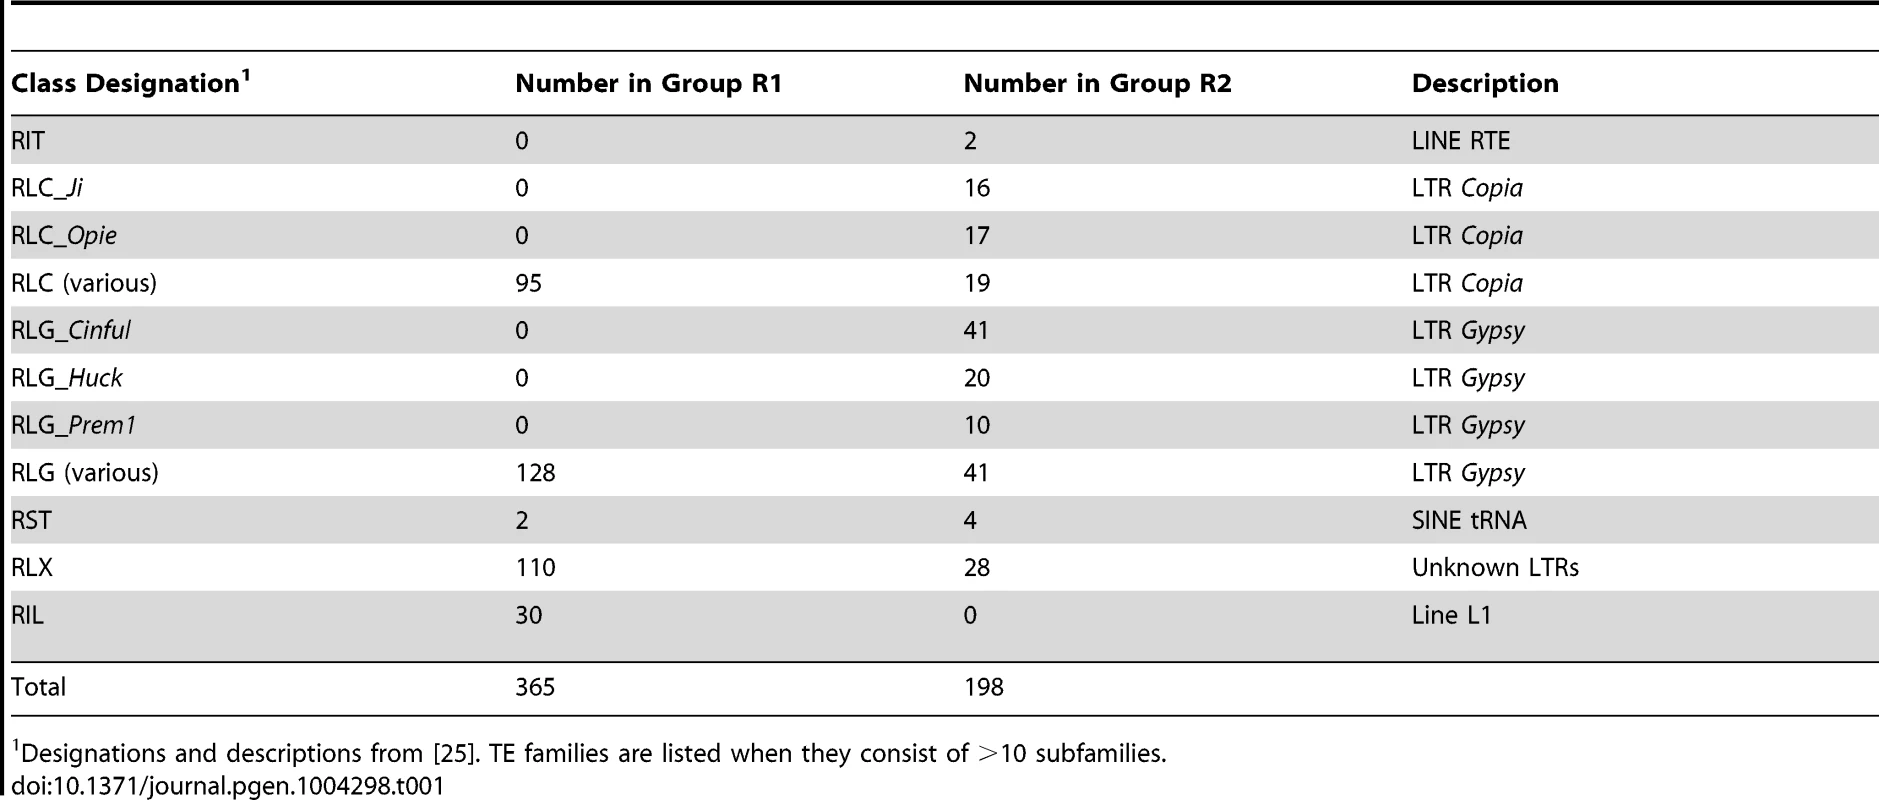 Characteristics of TE families within the R1 and R2 groups.